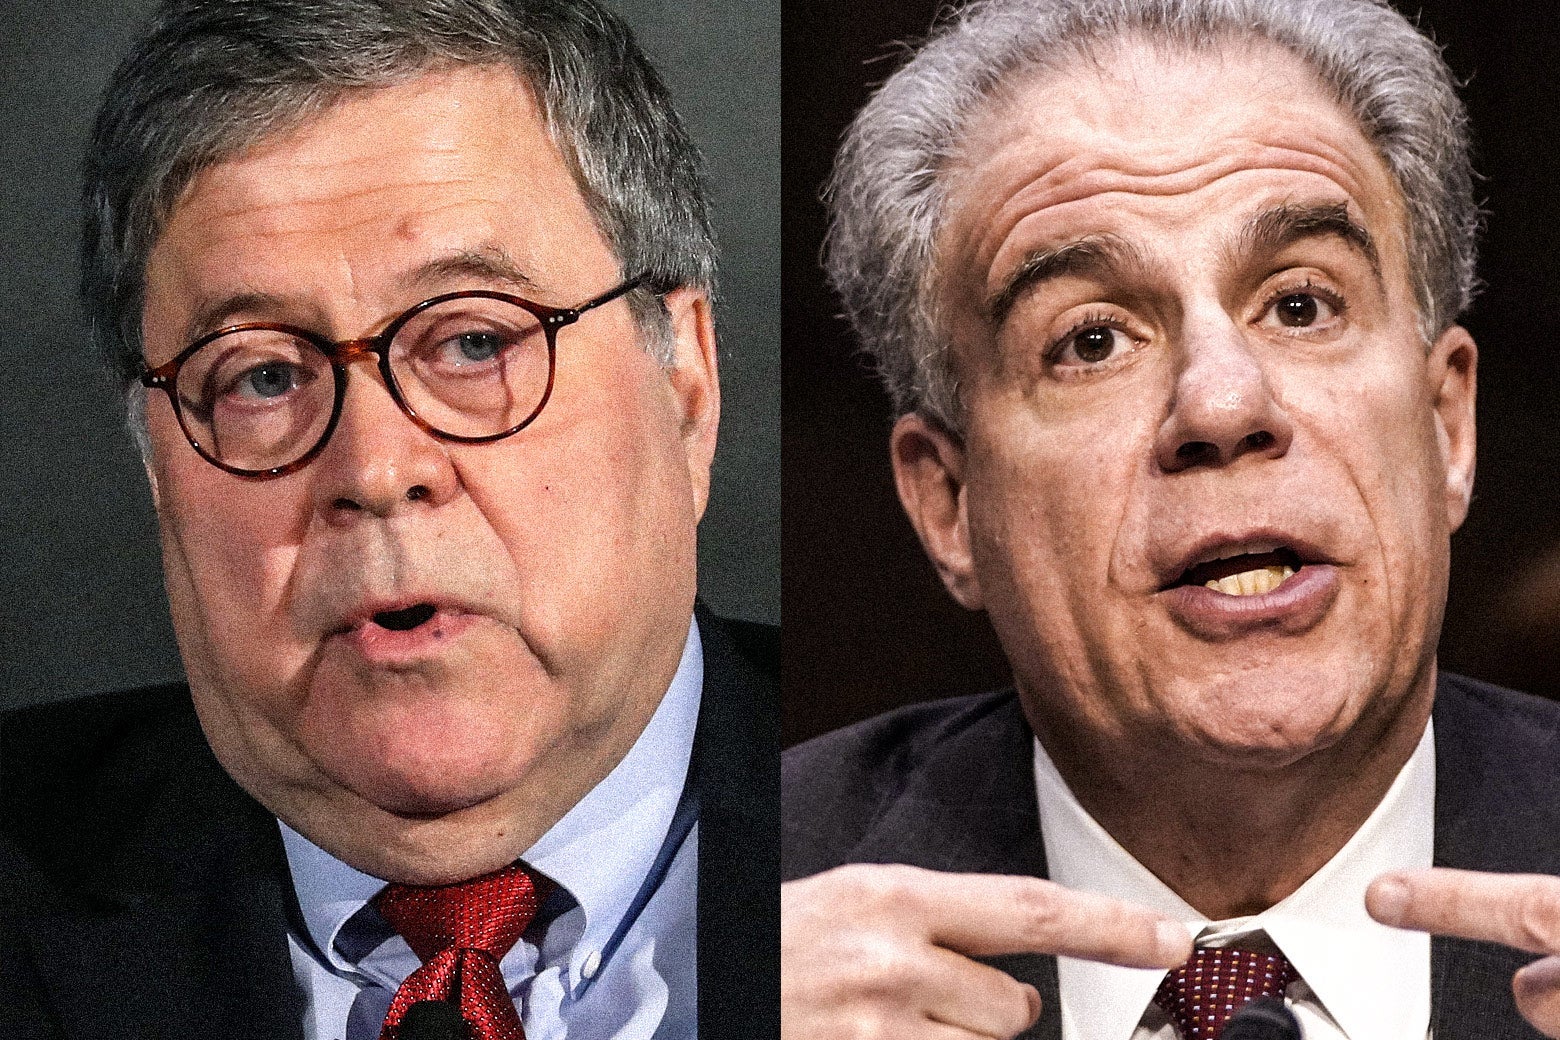 Side by side images of Barr and Horowitz